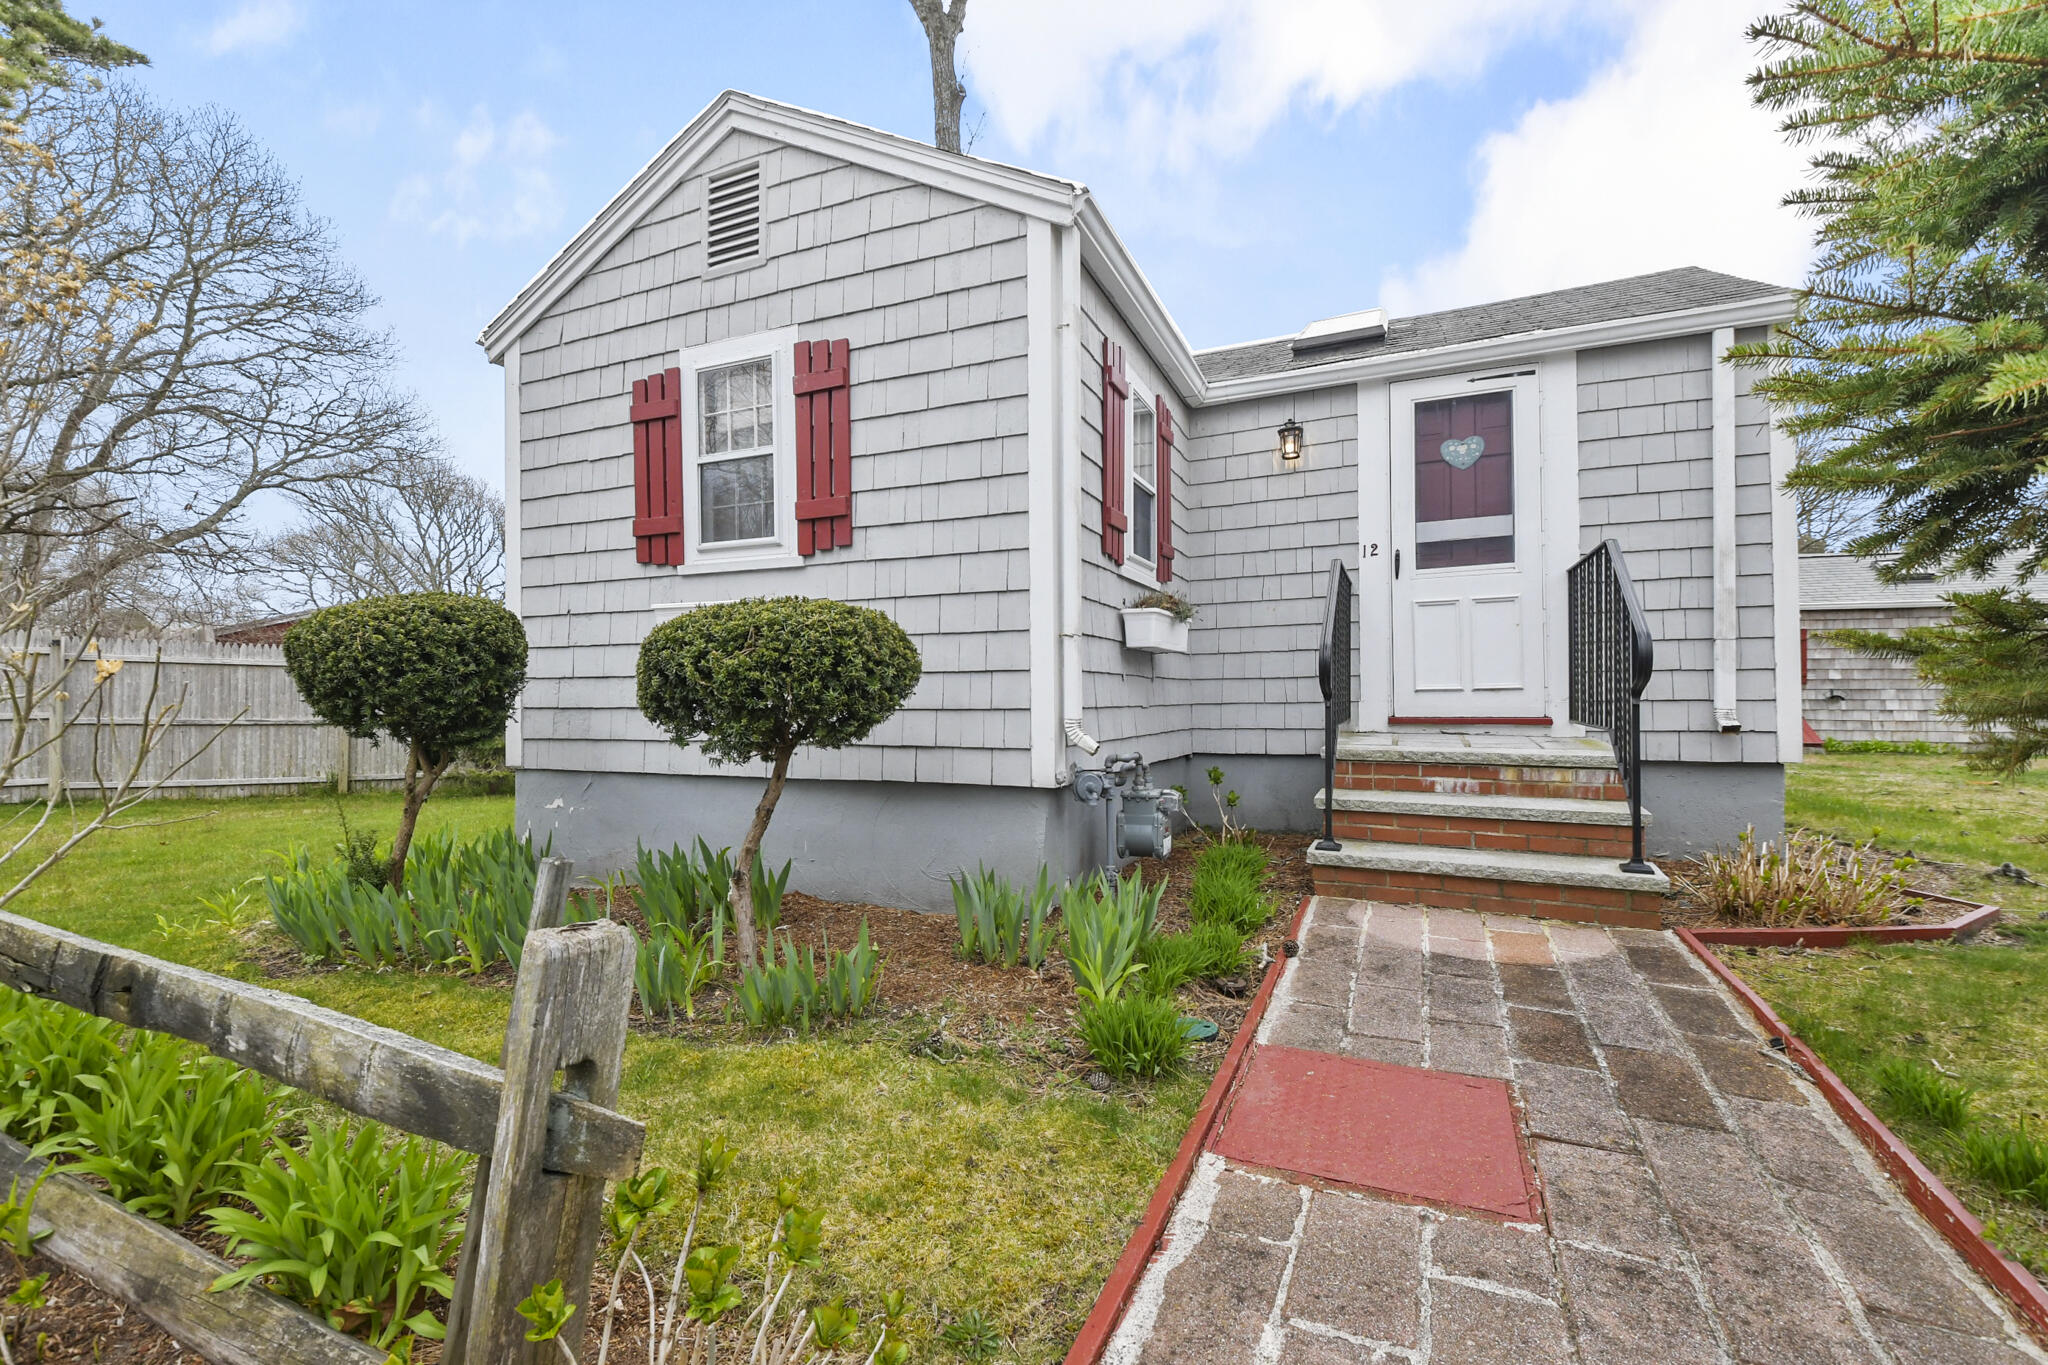 638 MA-28 # 12, West Yarmouth, Massachusetts 02673, 2 Bedrooms Bedrooms, 3 Rooms Rooms,1 BathroomBathrooms,Residential,For Sale,Beachwood,638 MA-28 # 12,22401879